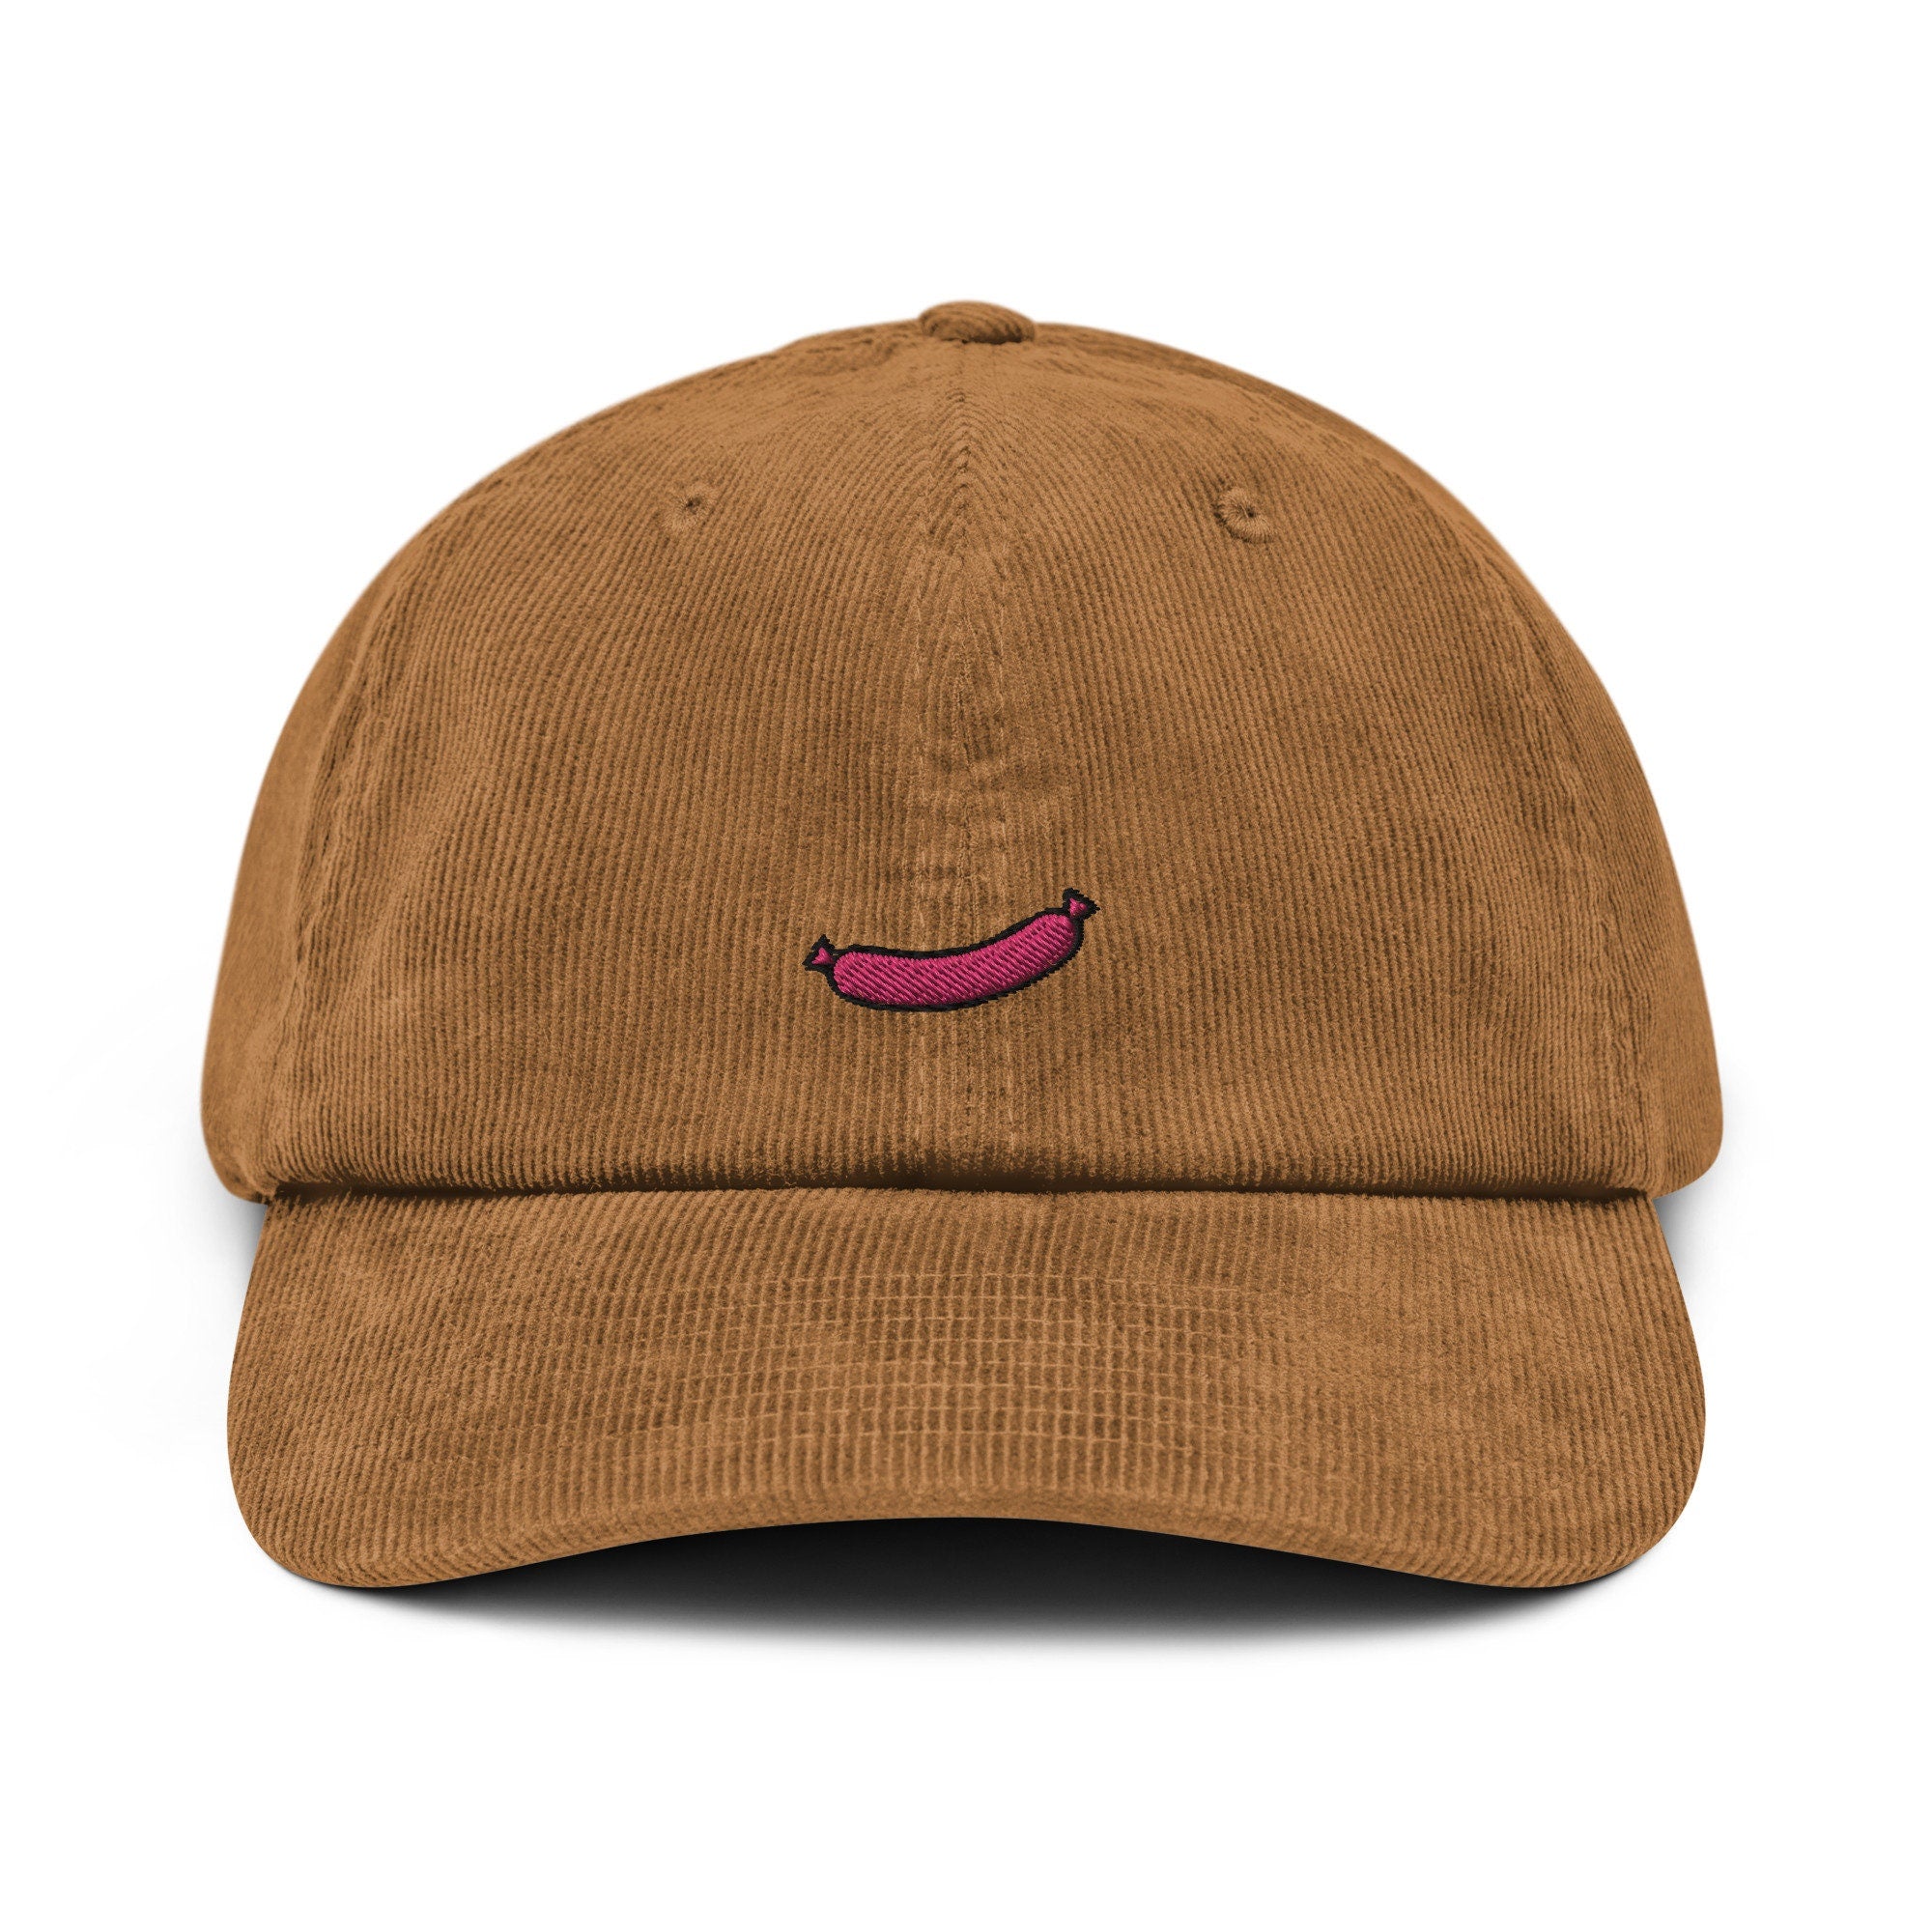 Sausage Corduroy Hat, Handmade Embroidered Corduroy Dad Cap - Multiple Colors